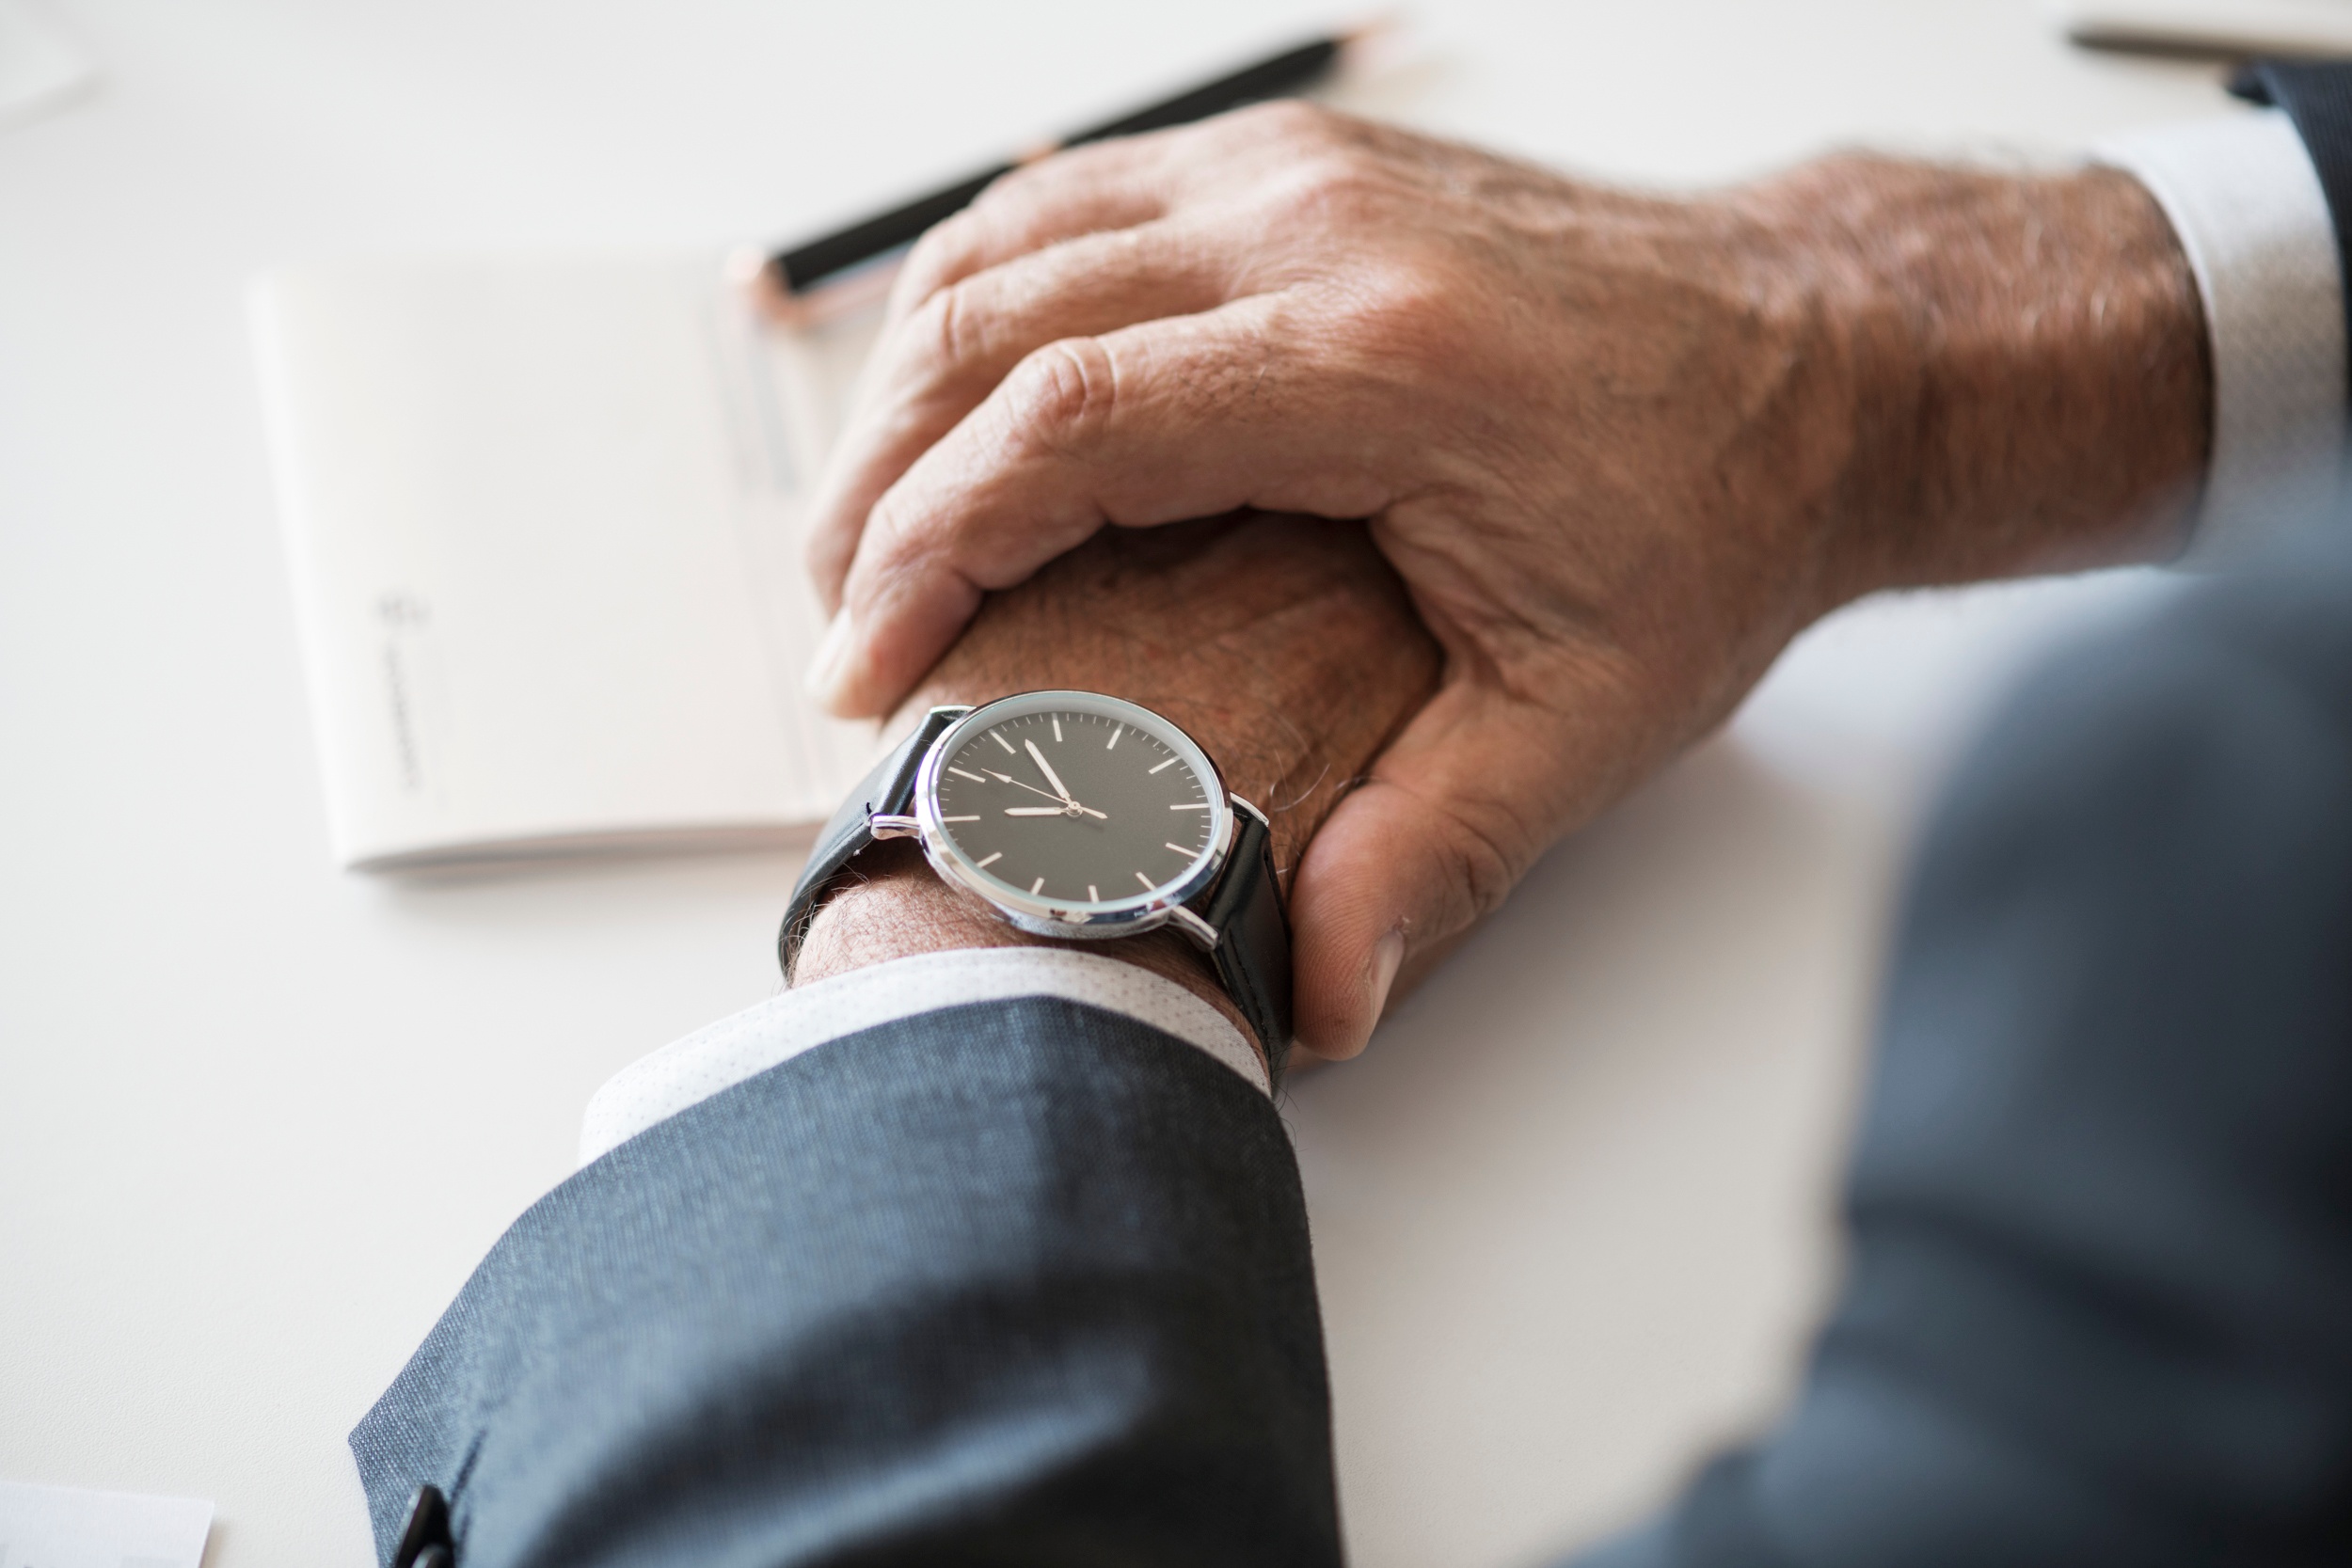 An image focused on a wristwatch, on the wrist of a person wearing a business suit. Image source: https://stocksnap.io/photo/VL9LPY5XWL